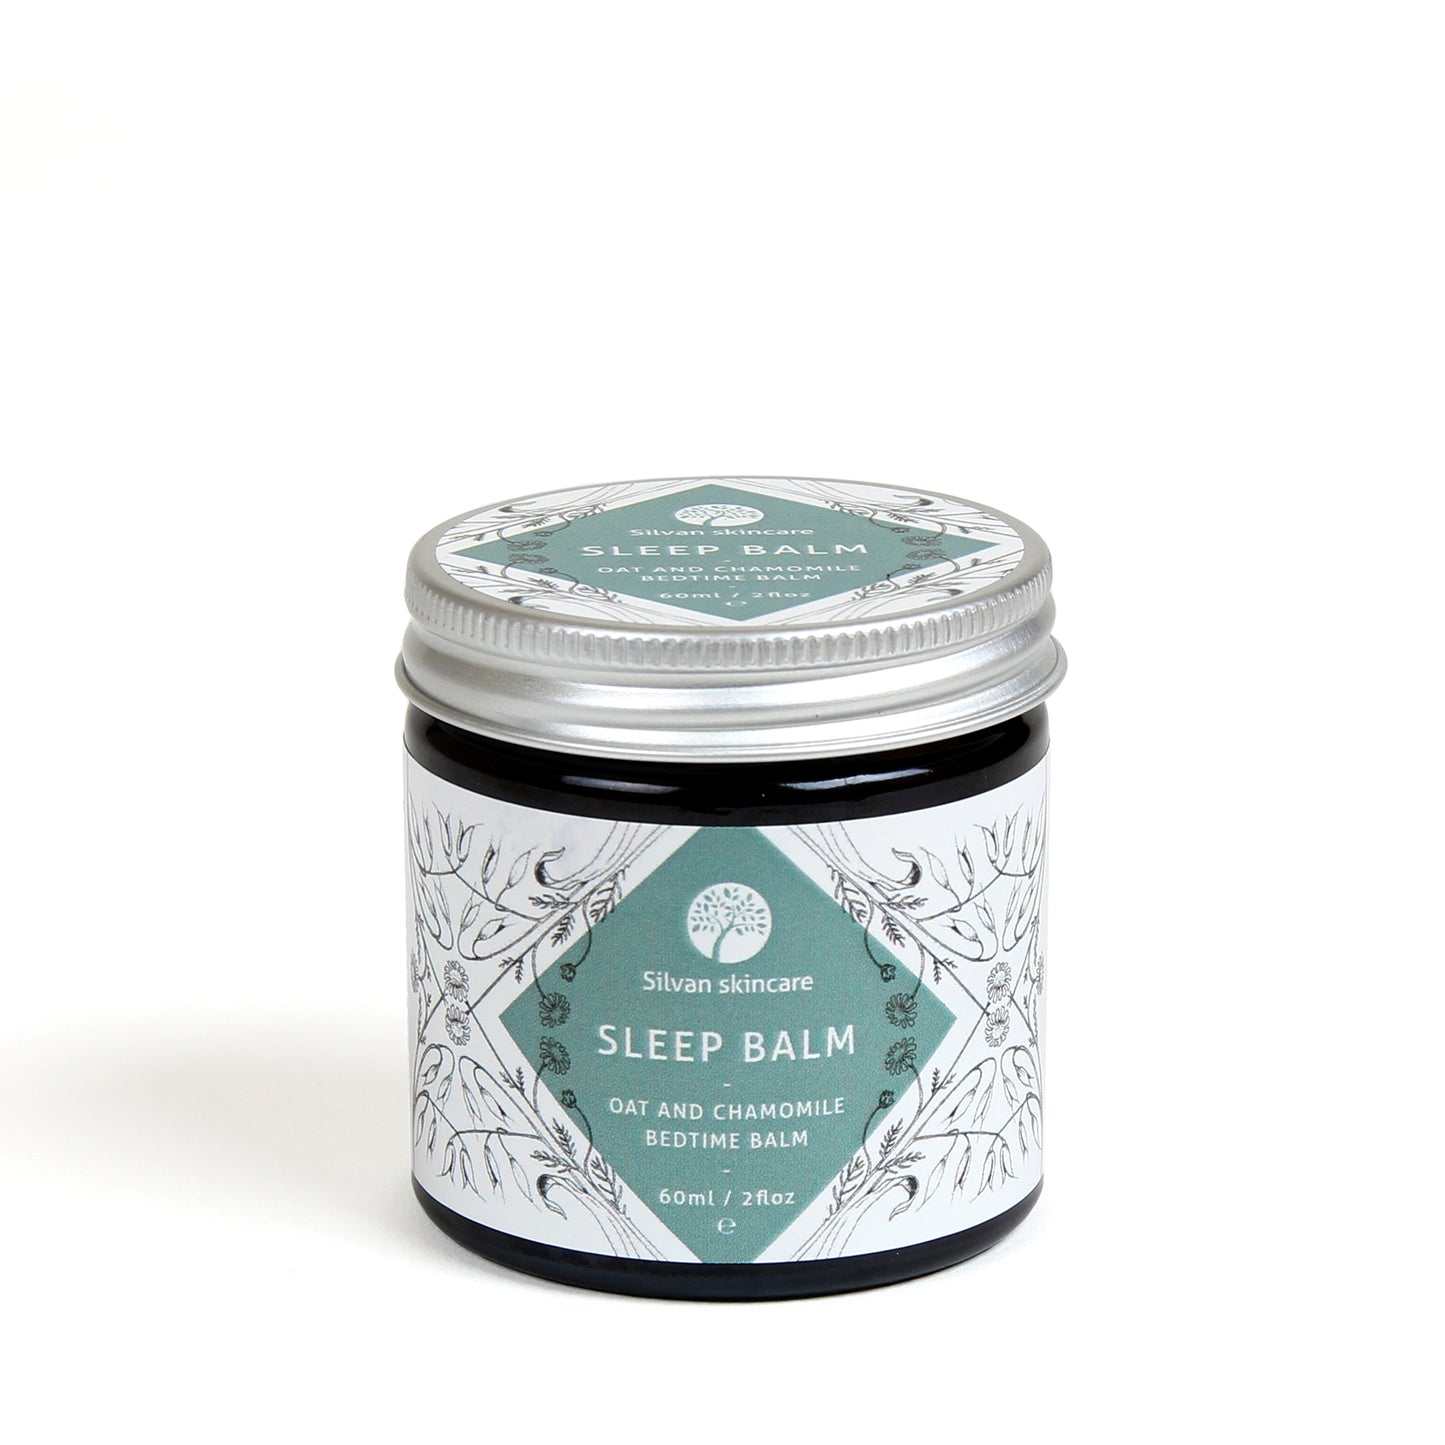 Silvan Skincare Sleep Balm is a soothing & relaxing bedtime balm | Cruelty Free | Plastic Free | Organic Natural Ingredients